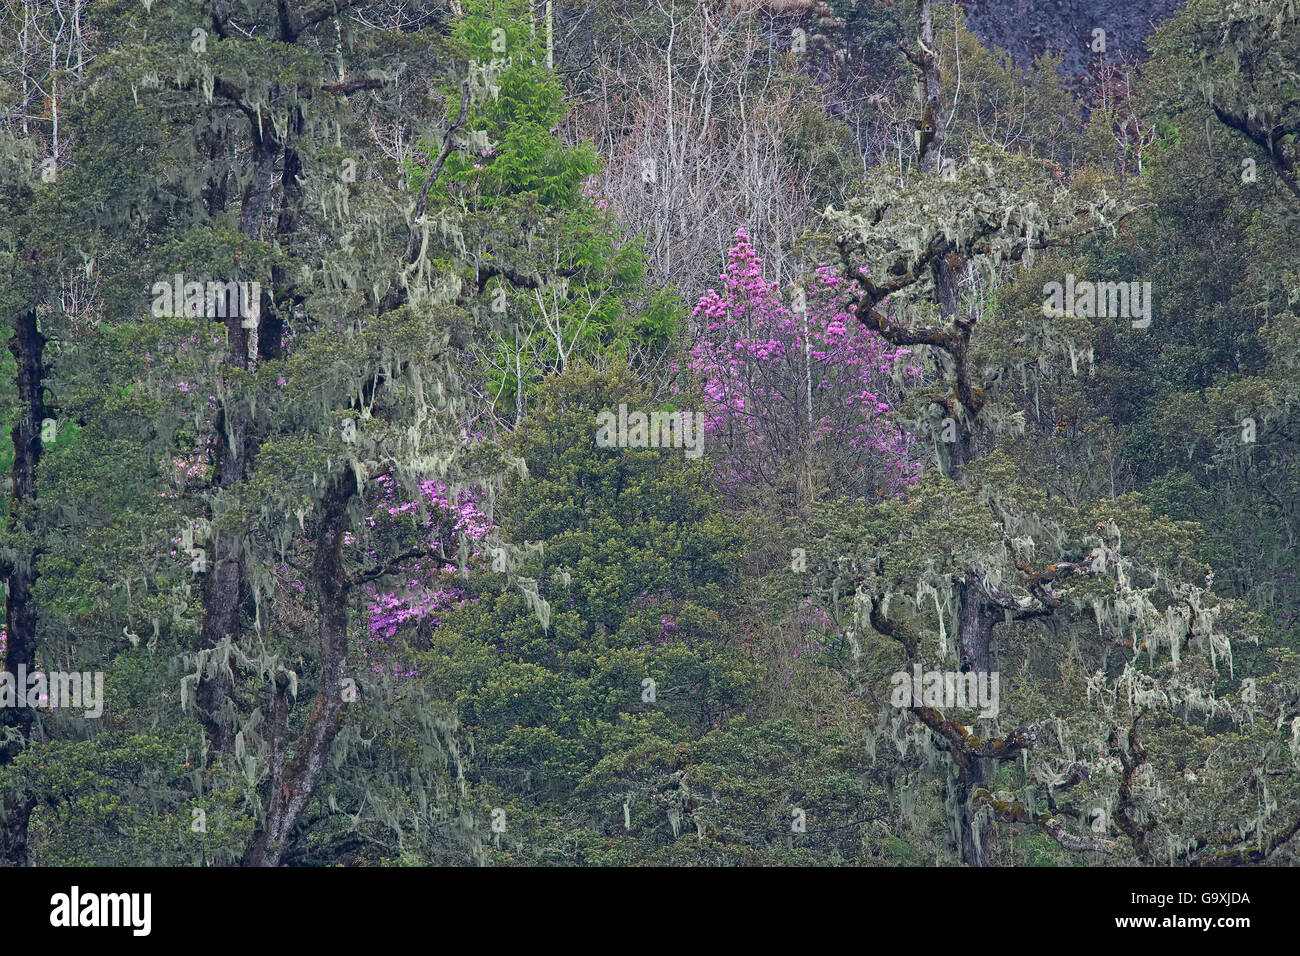 Forest with trees covered in Old man&#39;s beard (Usnea) and Rhododendron flowers (Rhododendron sp) Lijiang Laojunshan National Park, Yunnan Province, China. April. Stock Photo